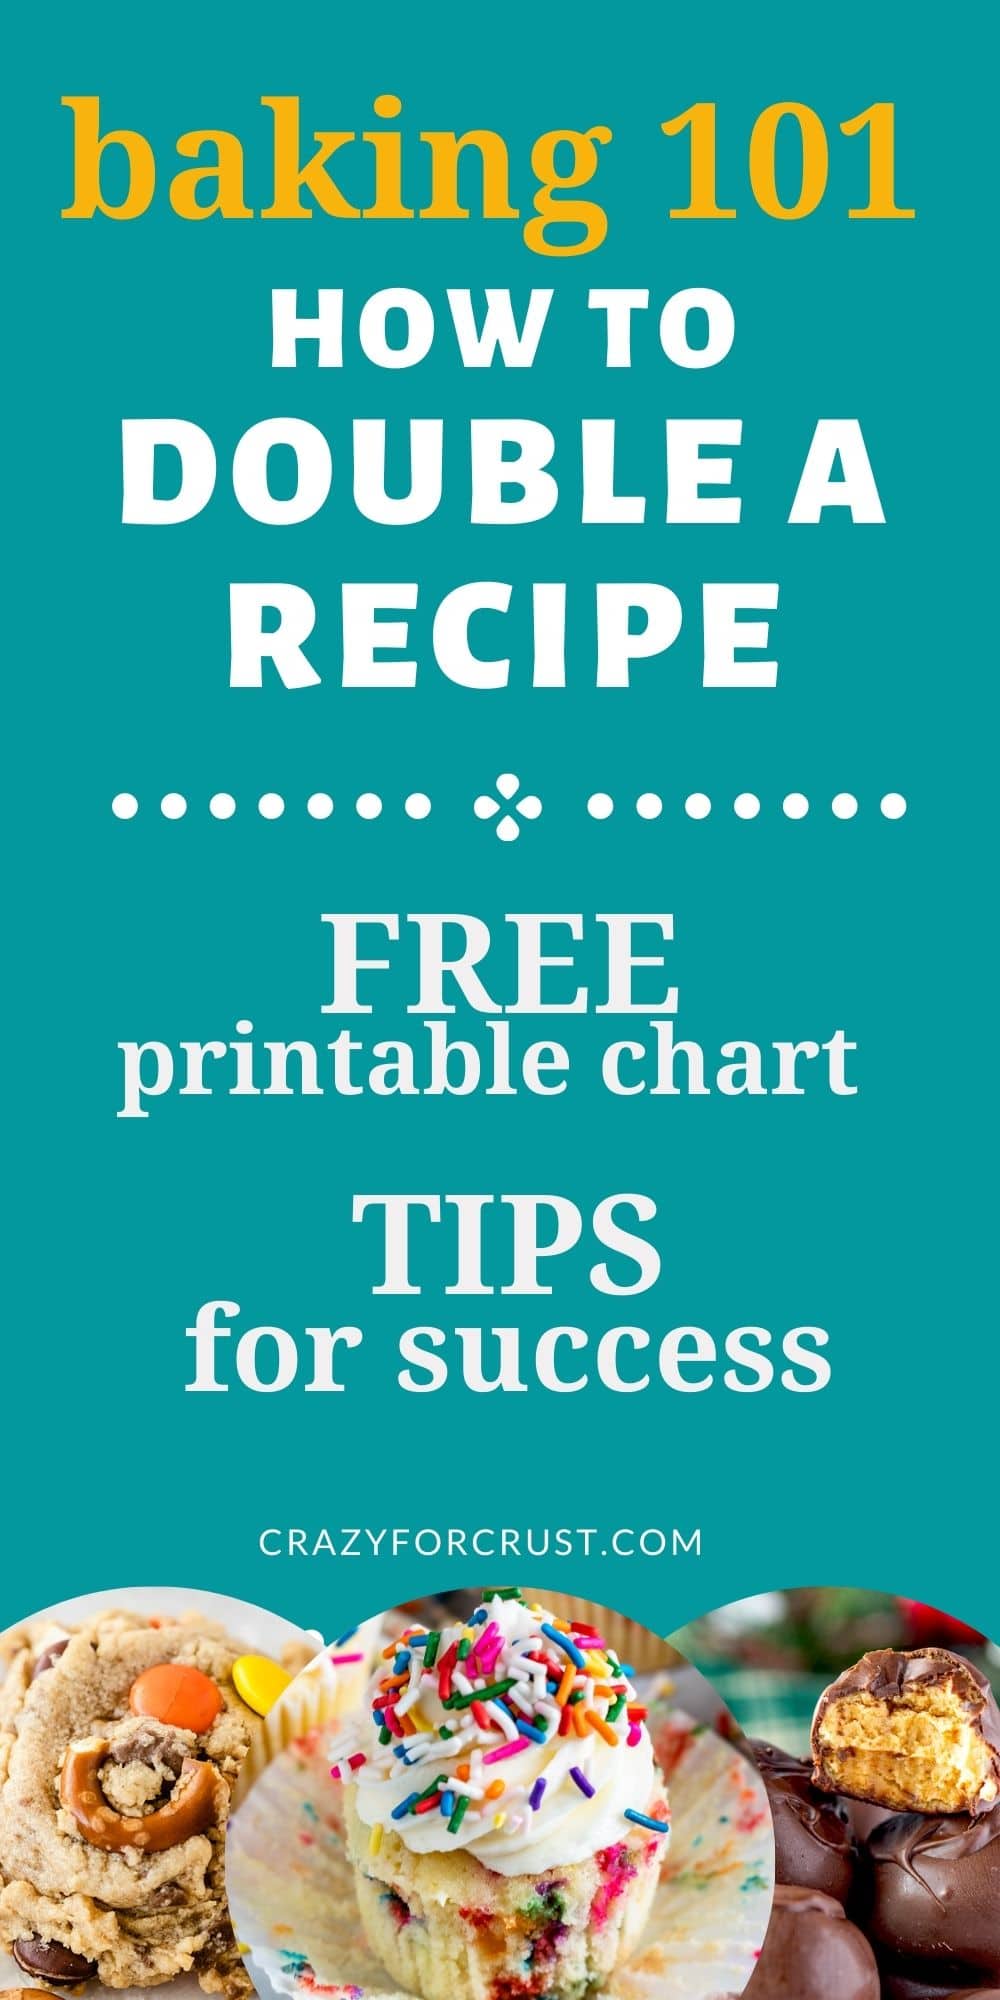 How to Double a Recipe (tips + FREE chart) - Crazy for Crust